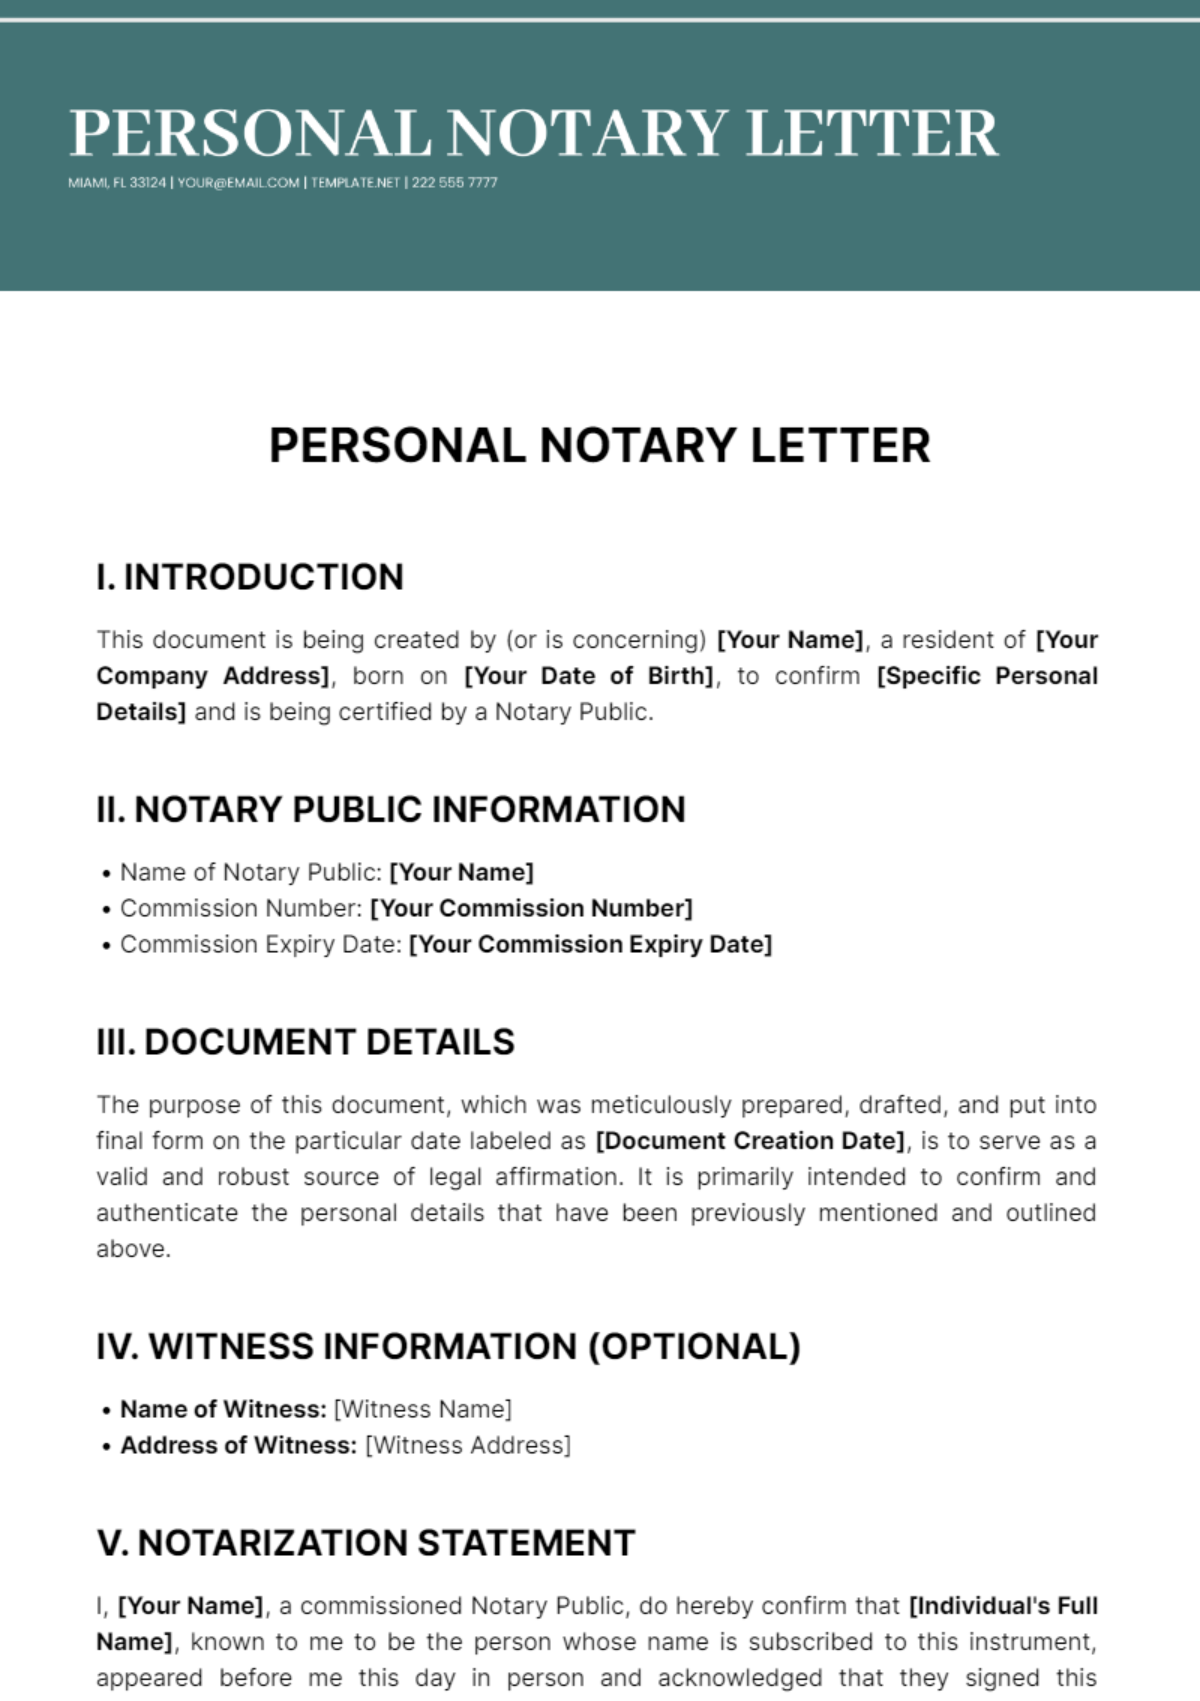 Personal Notary Letter Template